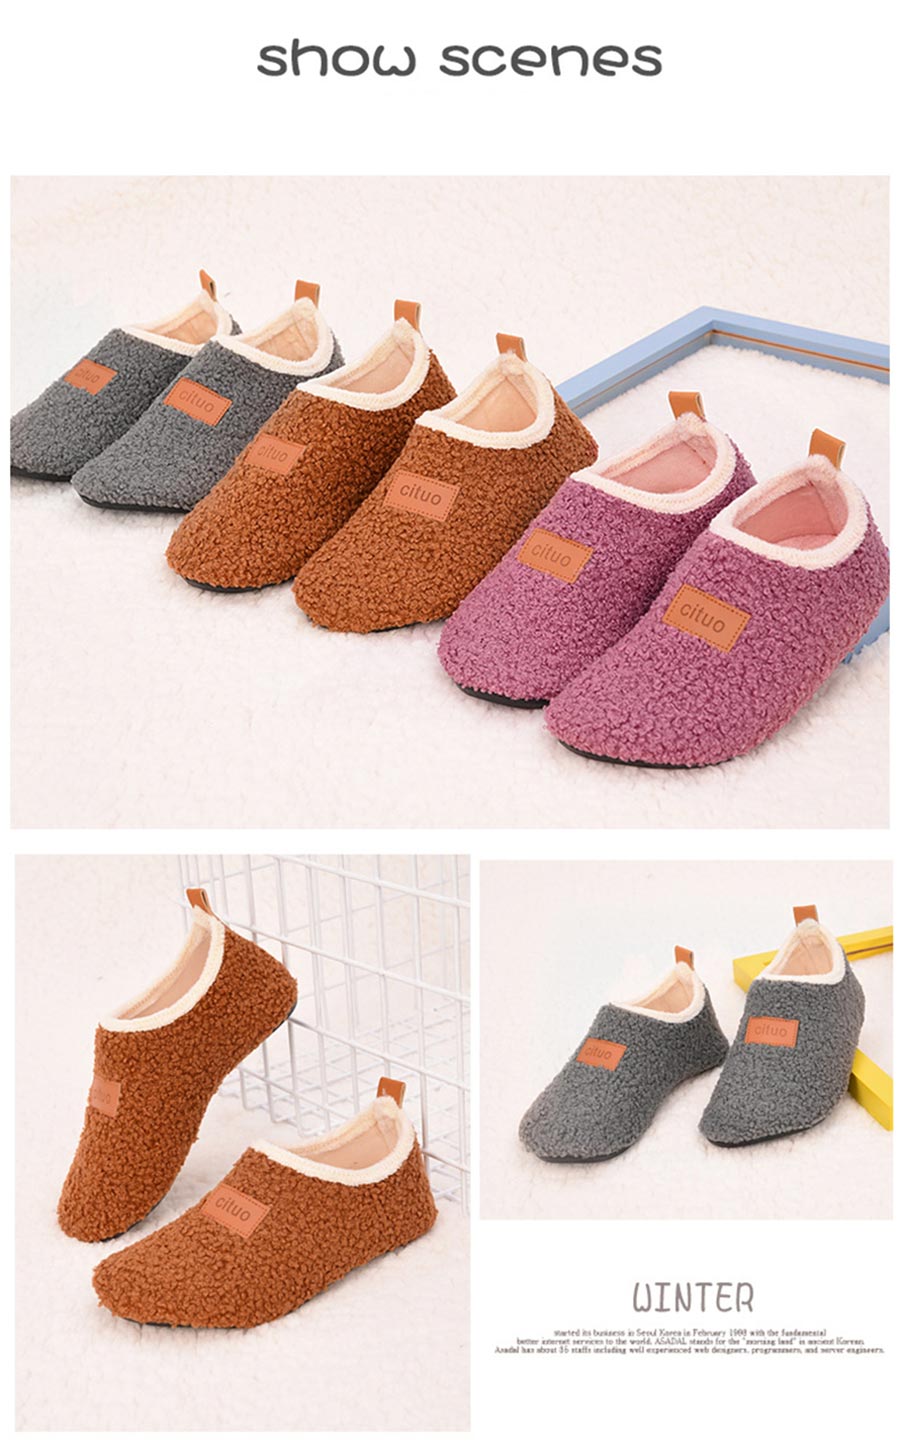 Winter Kids Slippers Teddy Plush Warm Floor Sock Shoes Baby Boys Soft Sole Non-slip Cotton Slippers Girls Indoor Home Shoes 2021